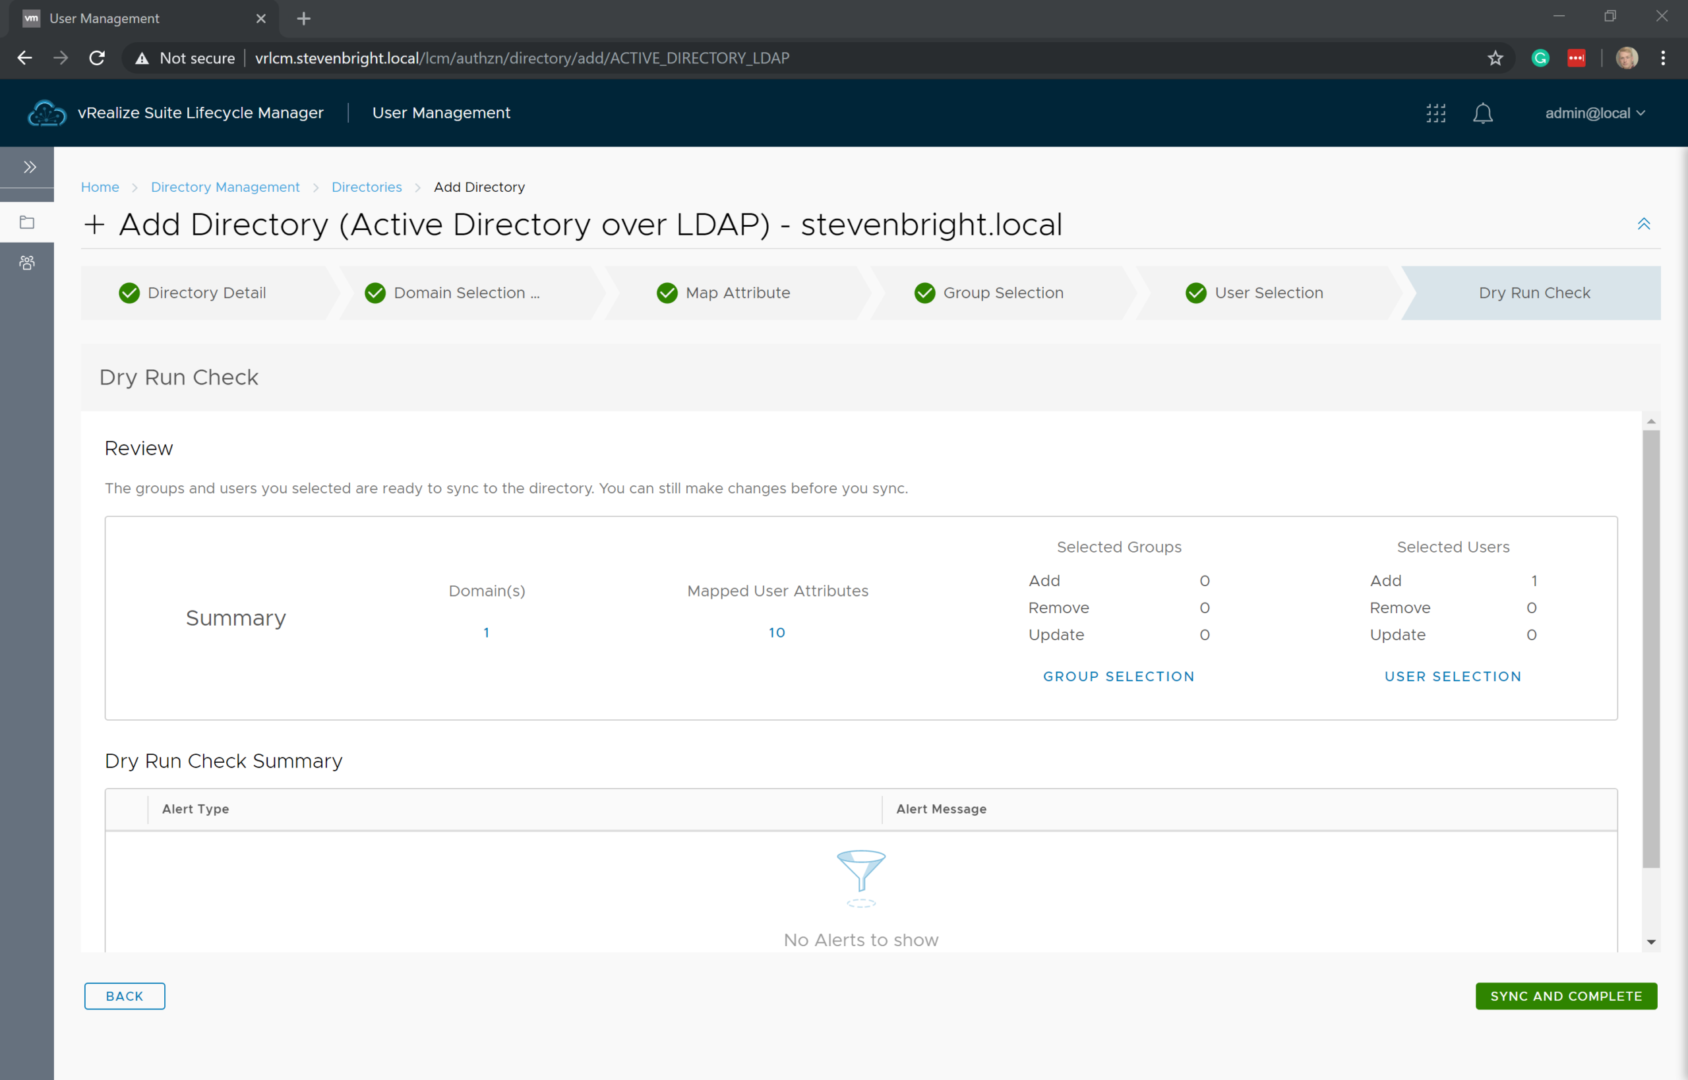 vRealize Suite Lifecycle Manager - User Management - Directory Management - Add Directory Wizard - Dry Run Check